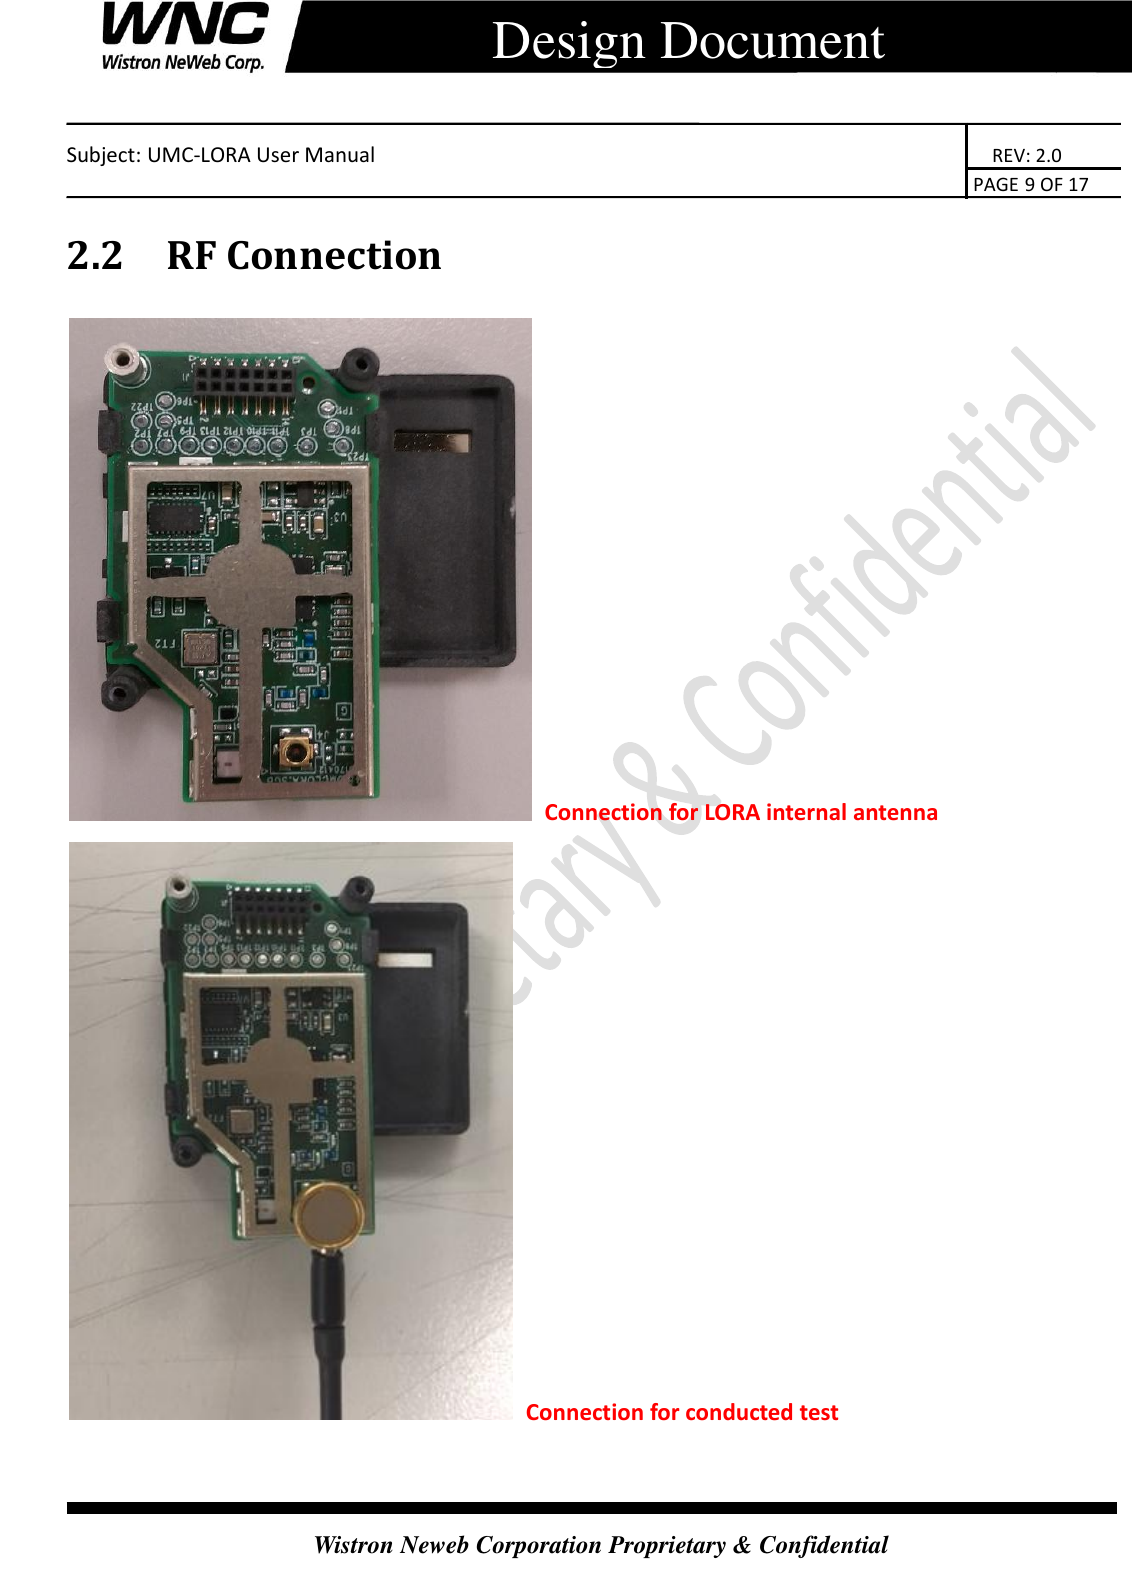    Subject: UMC-LORA User Manual                                                                      REV: 2.0                                                                                        PAGE 9 OF 17  Wistron Neweb Corporation Proprietary &amp; Confidential      Design Document 2.2 RF Connection  Connection for LORA internal antenna  Connection for conducted test   